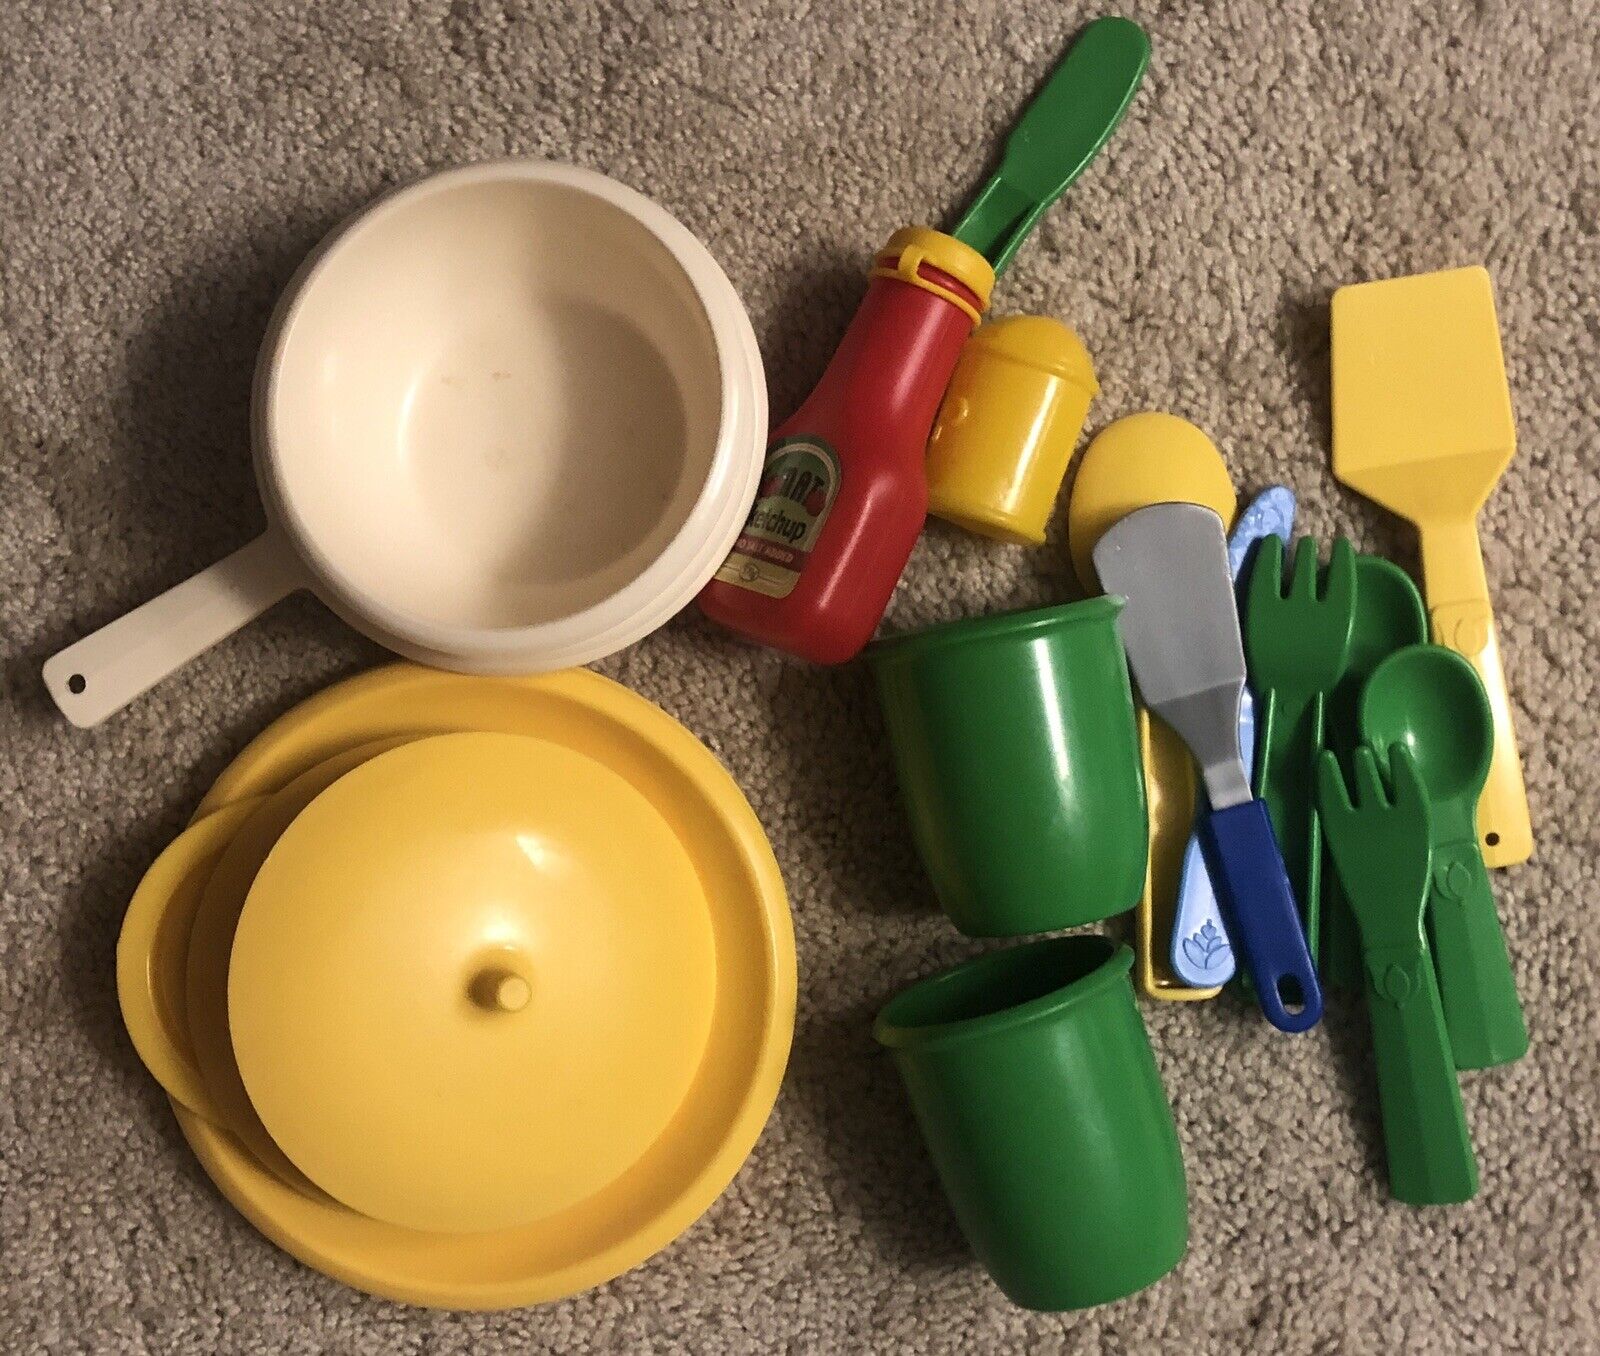 Little Tikes Play Plates Dishes Silverware 1984 Cups Mixed Lot Pan